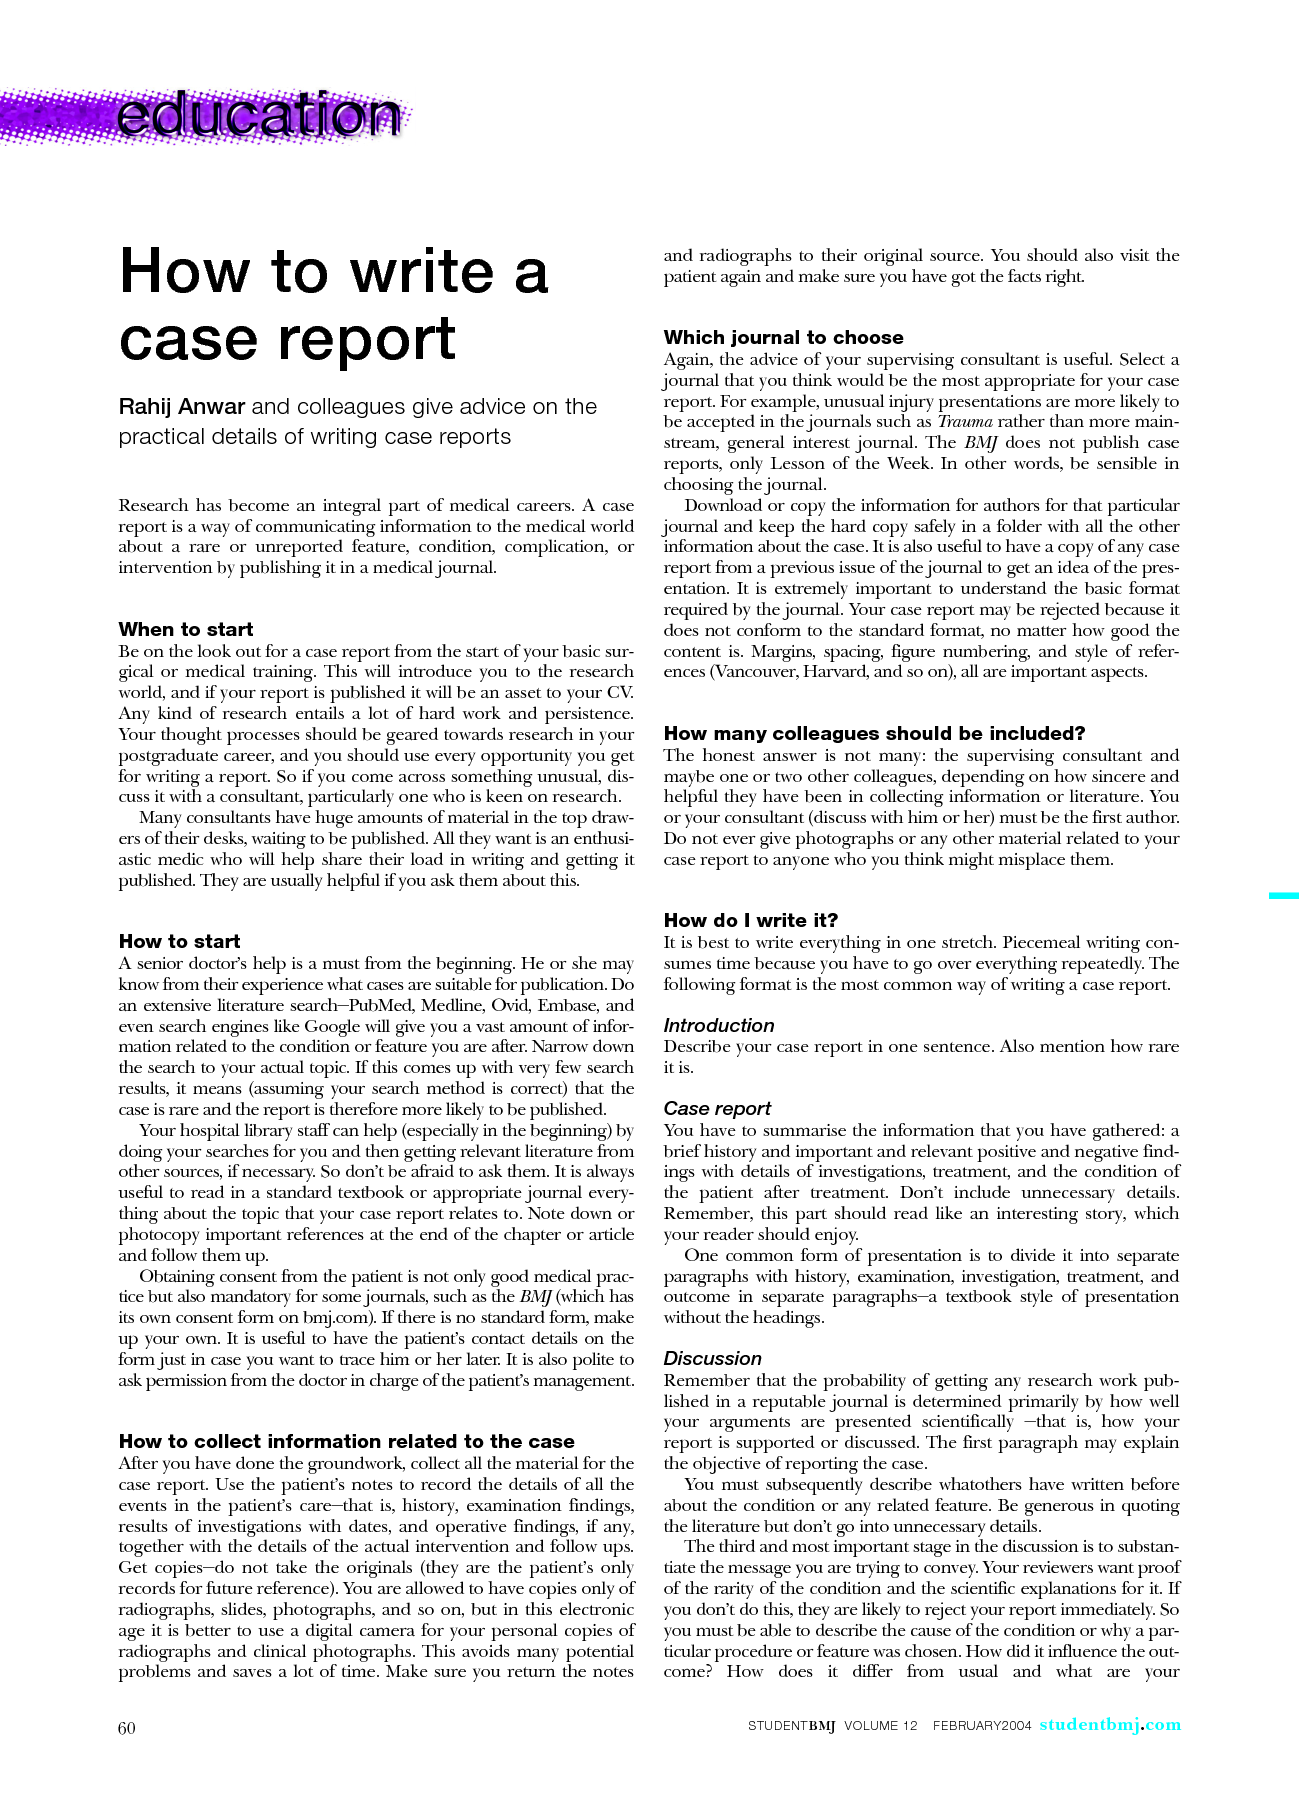 A young researcher's guide to writing a clinical case report| Editage Insights